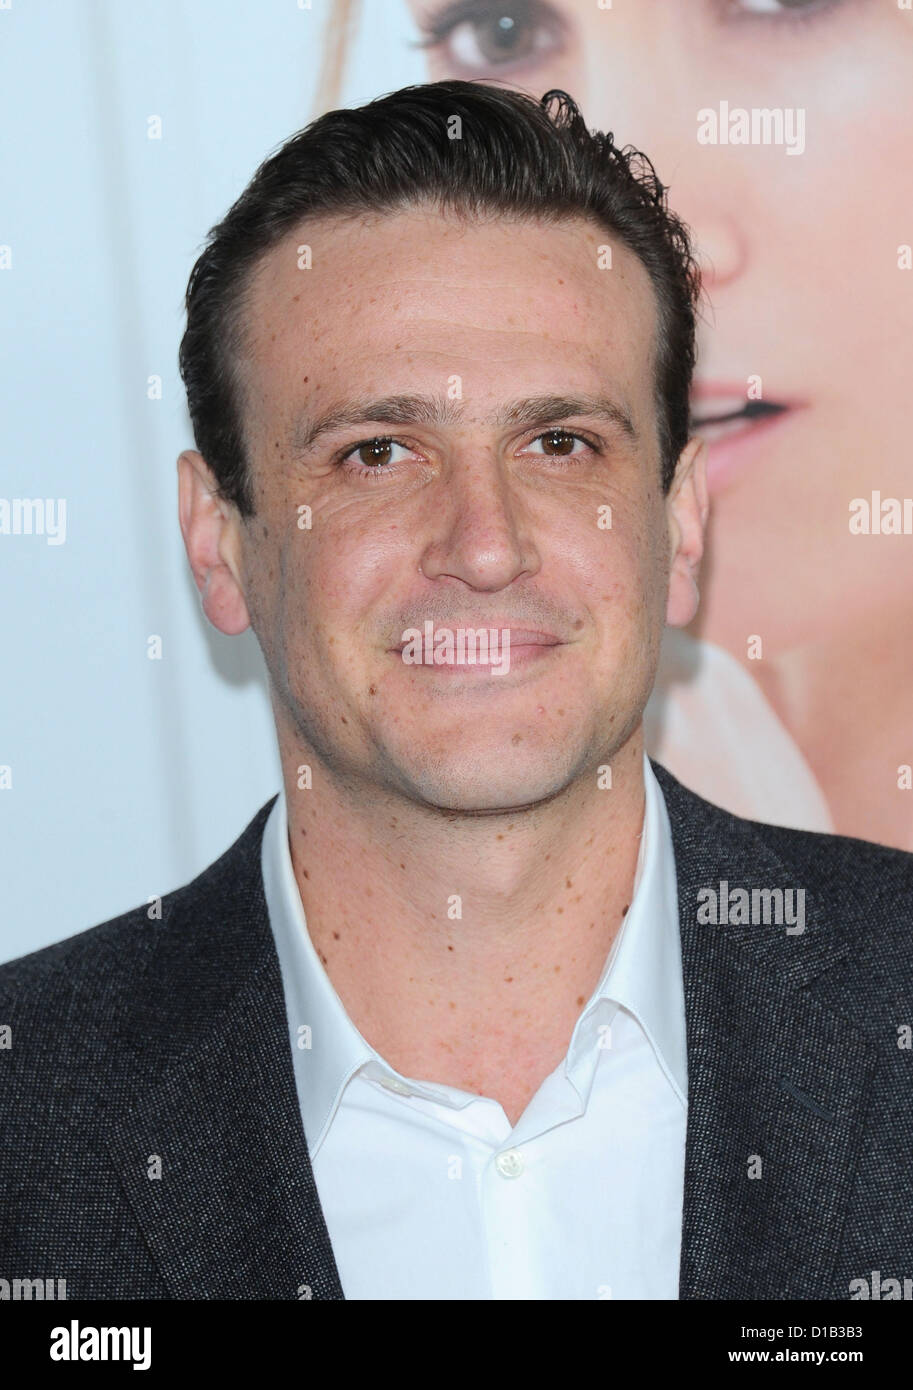 Hollywood, California, USA. 12th December 2012. Jason Segel arriving at the Los Angeles film premiere of 'This is 40' Chinese Theatre, Hollywood, CA, USA Dec 12th 2012 Stock Photo